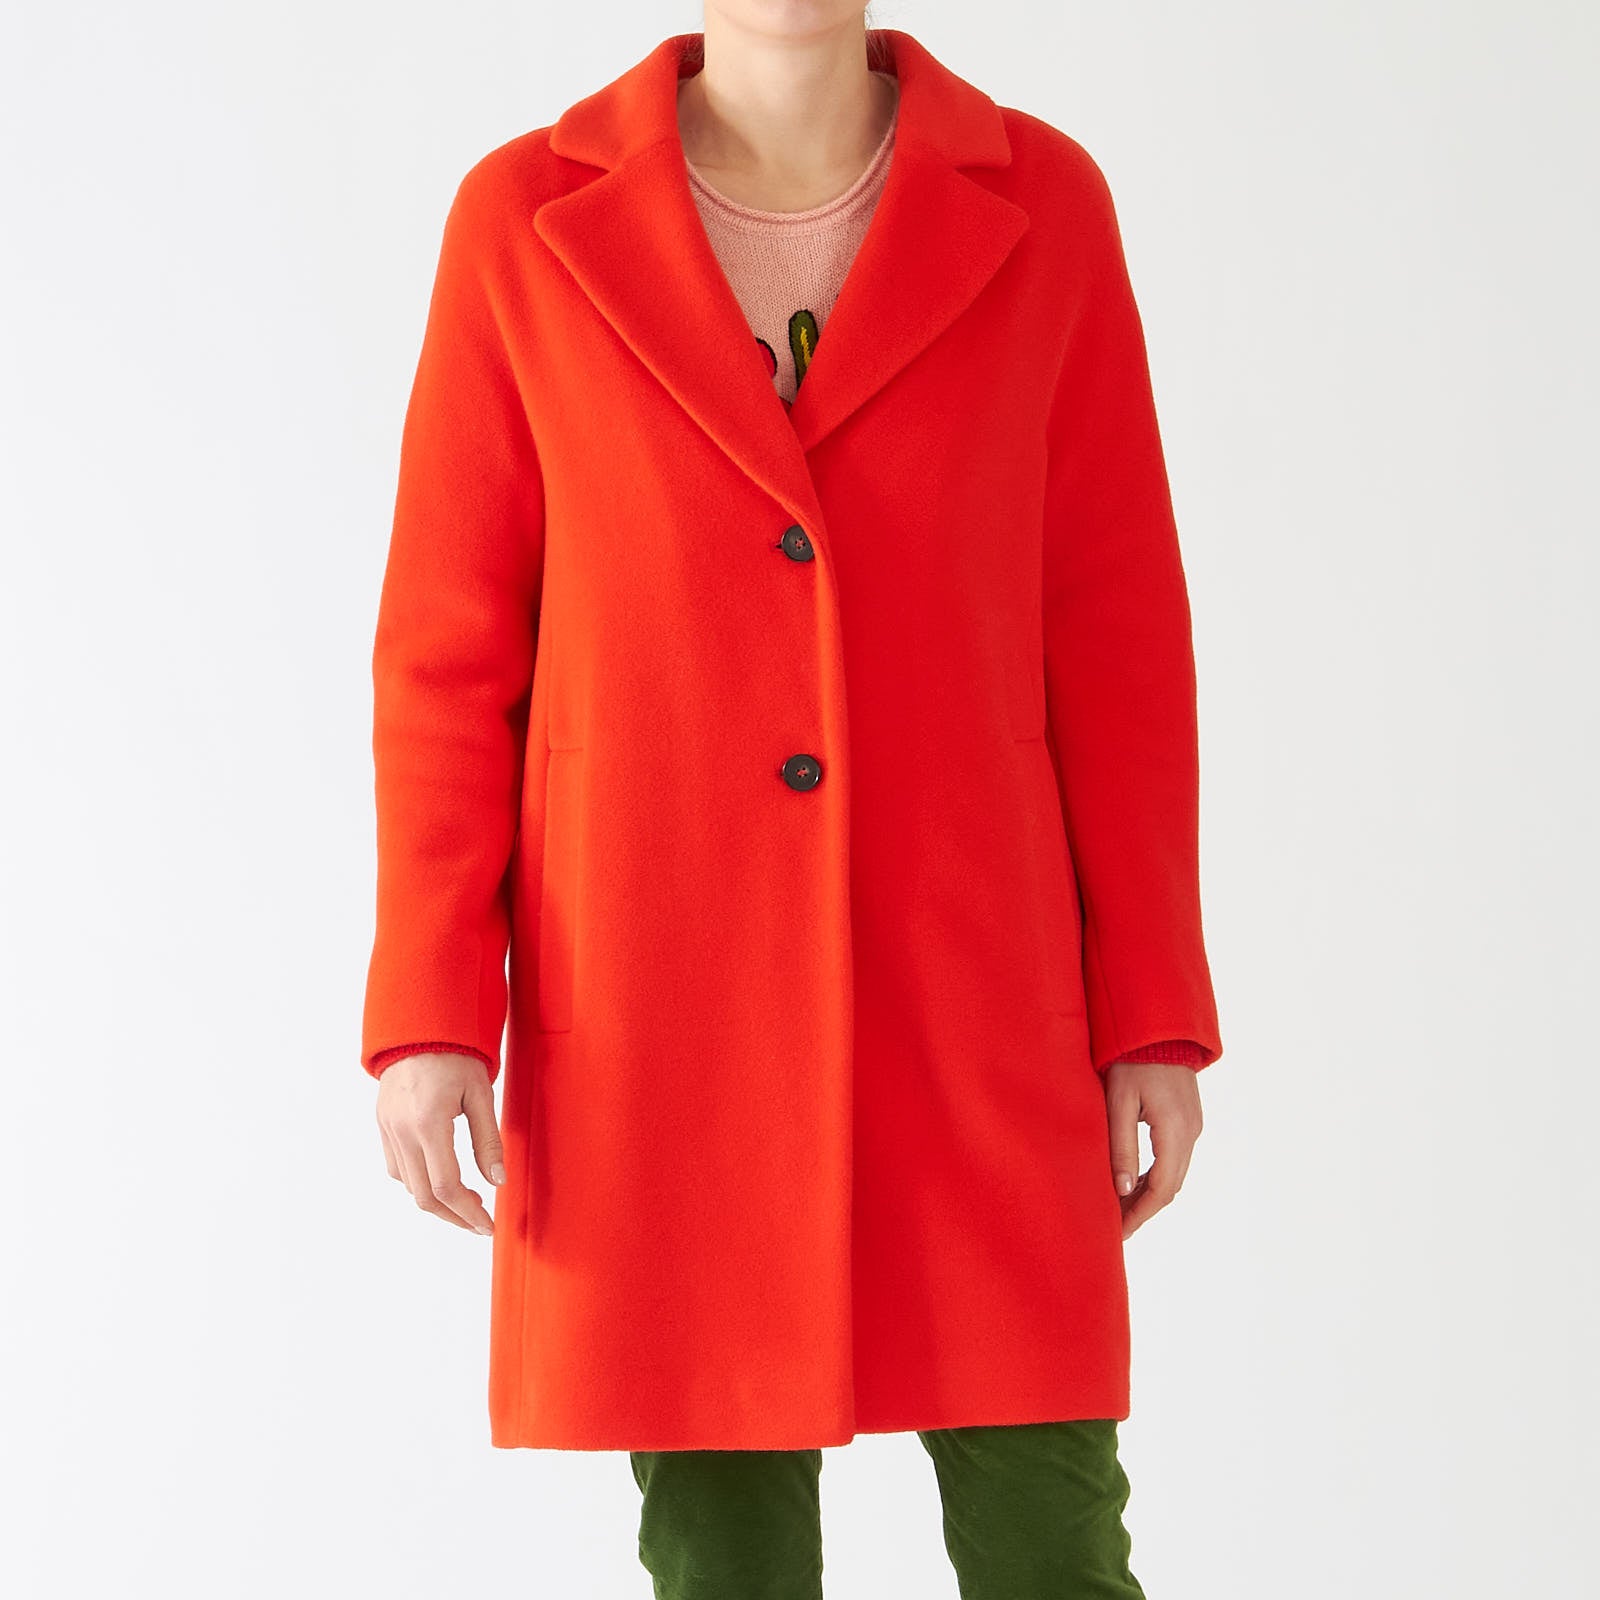 Bright Fire Red Wool Blend Coat